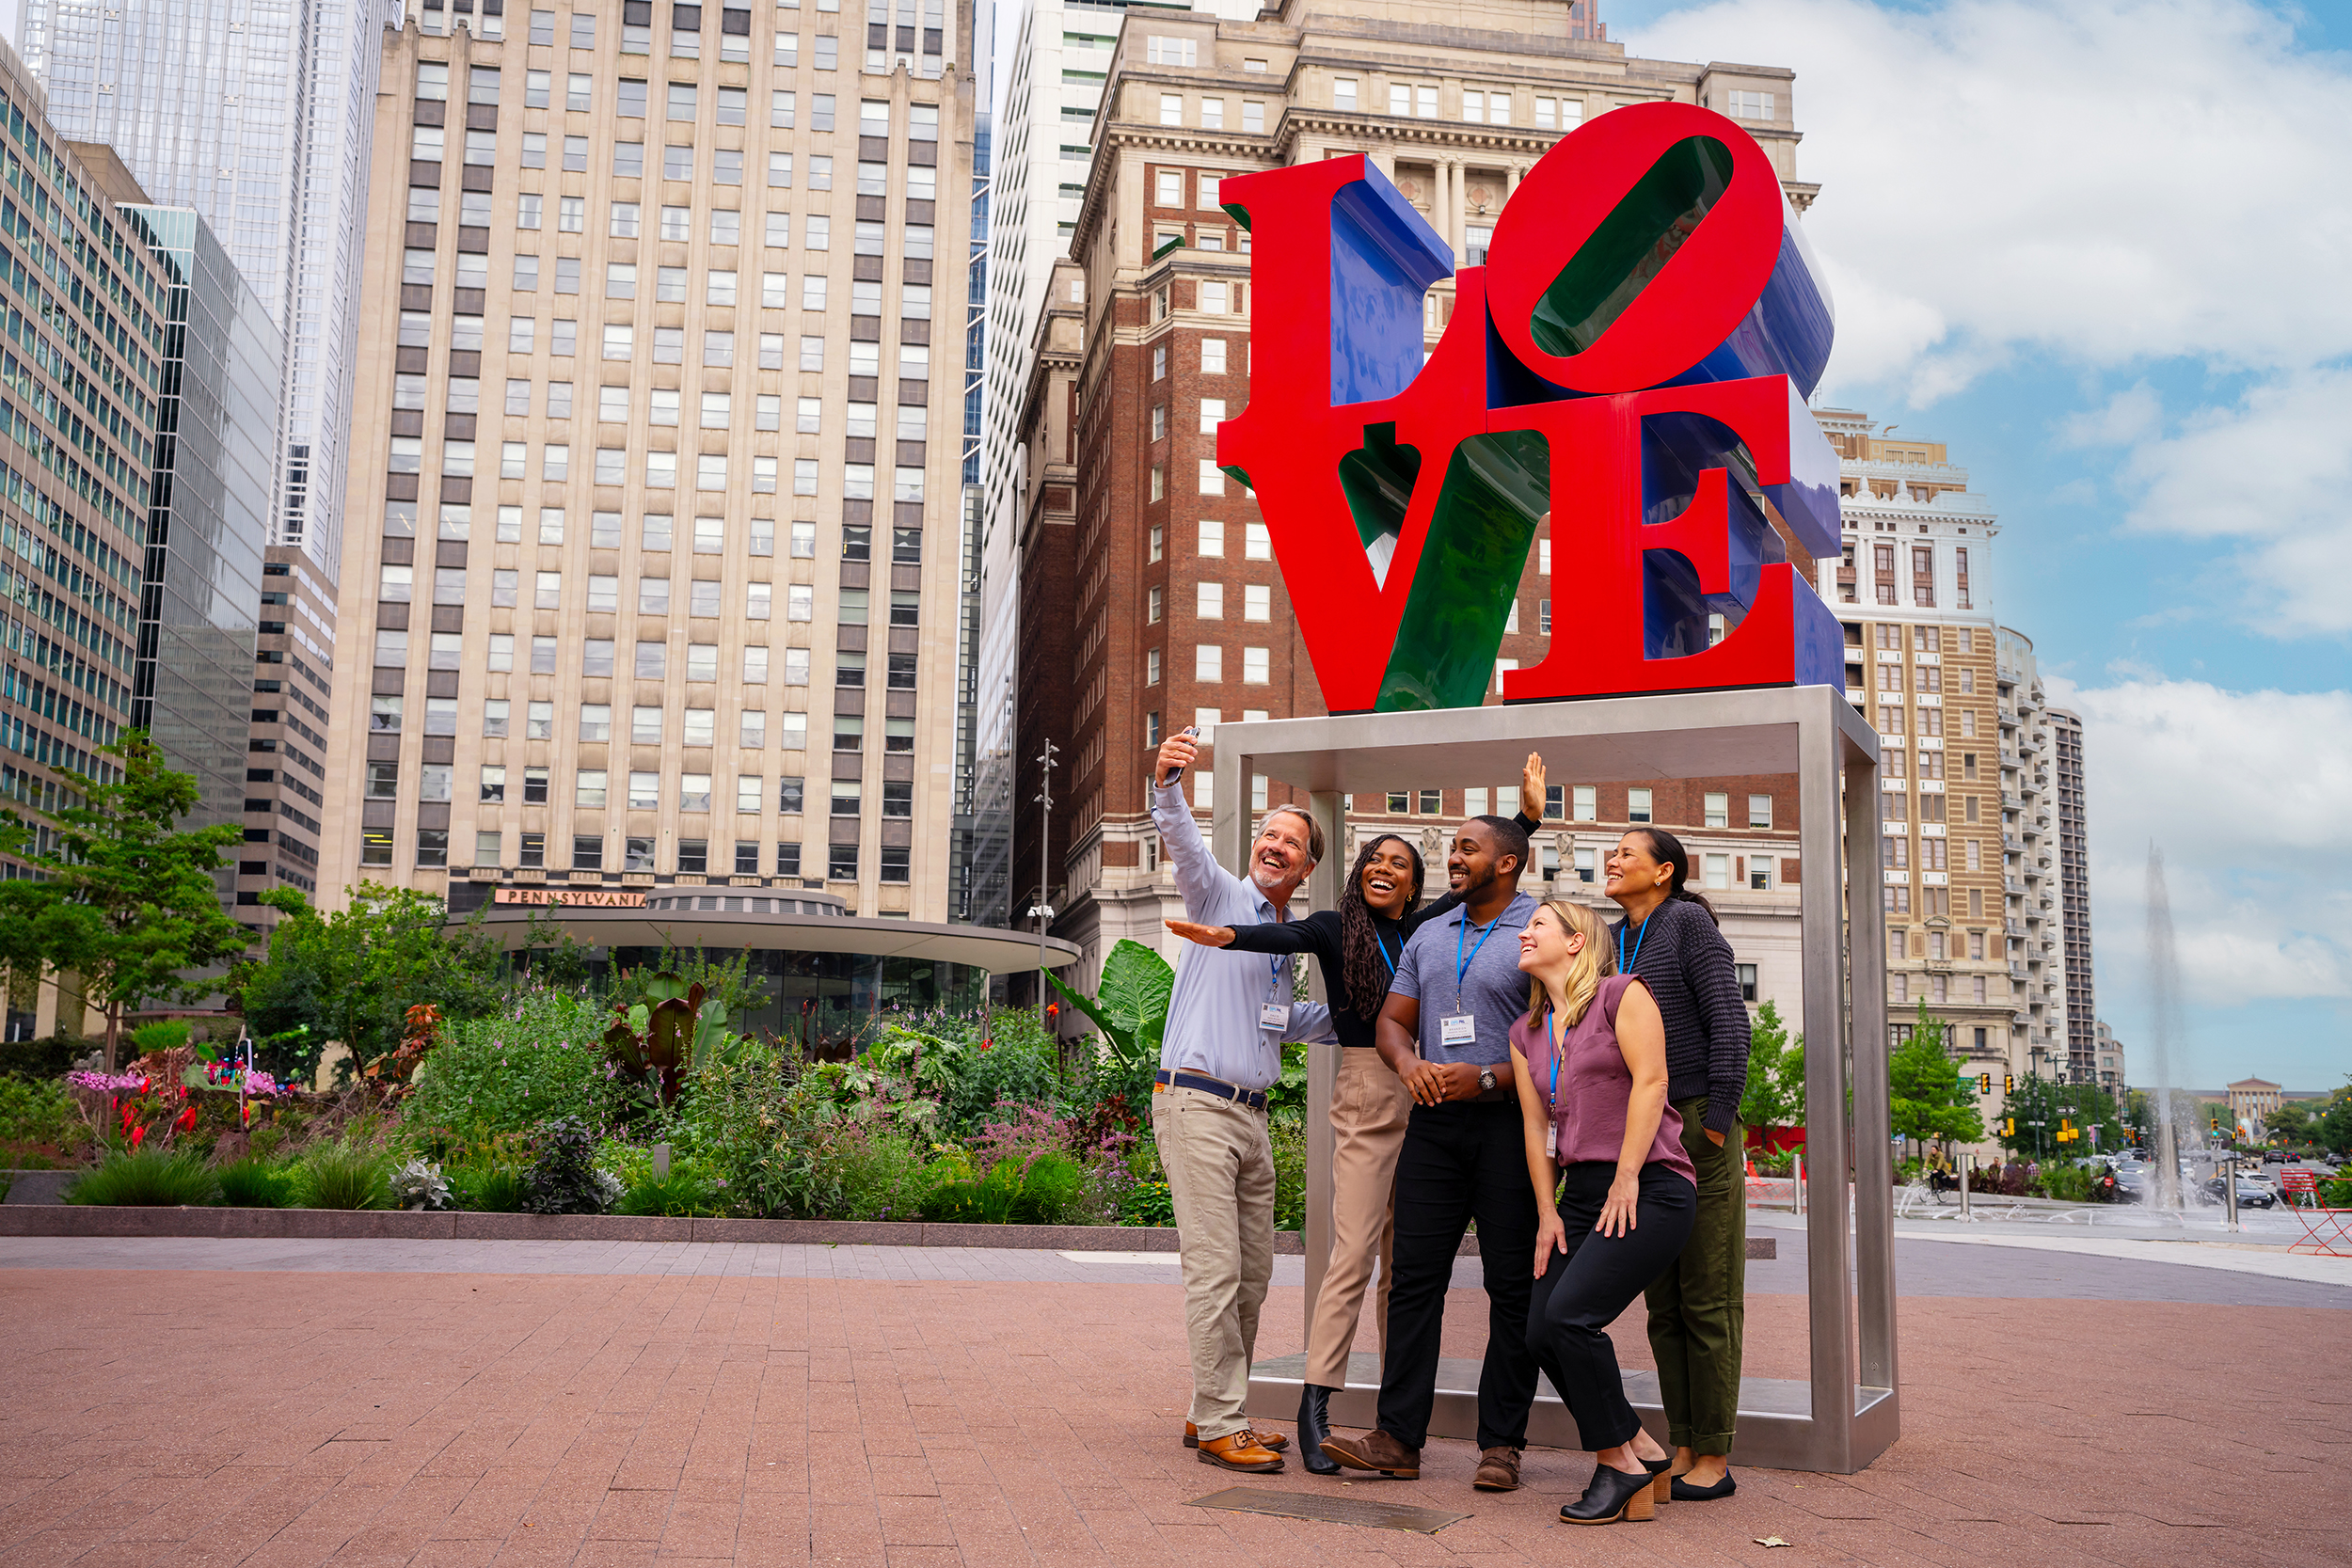 A group of people wearing convention badges pose for a selfie in front of the LOVE statue.